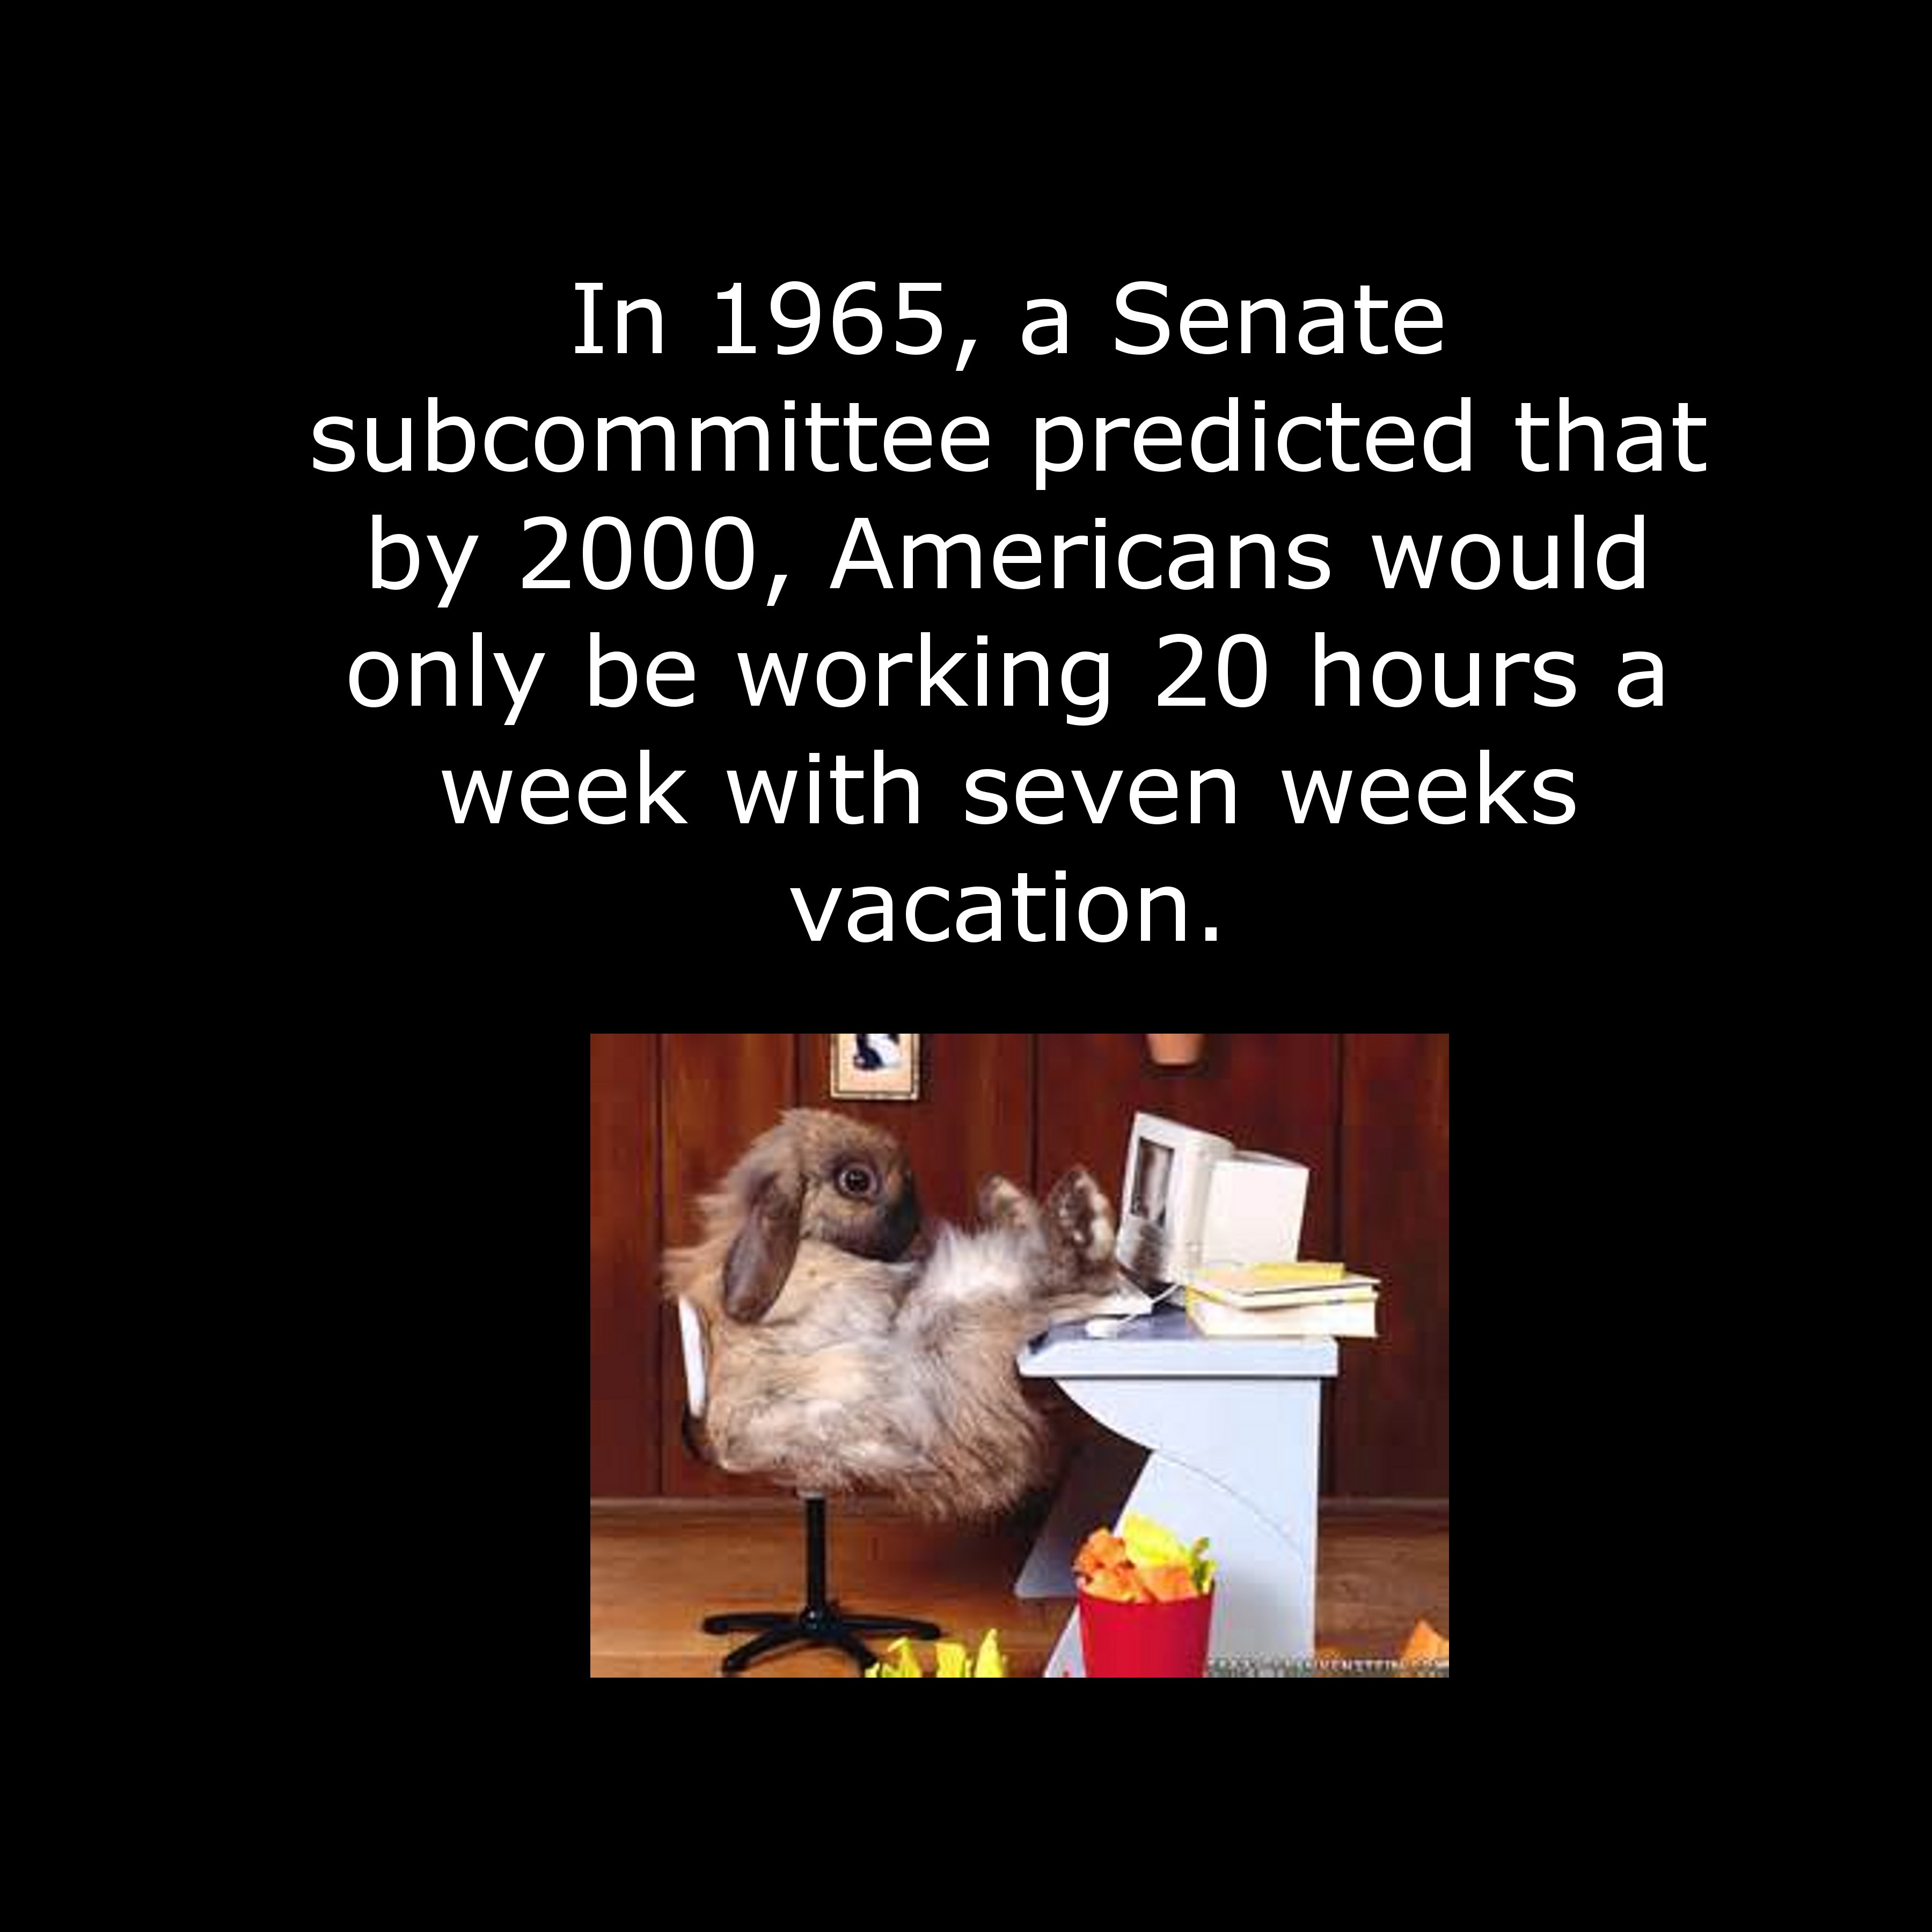 In 1965, a Senate subcommittee predicted that by 2000, Americans would only be working 20 hours a week with seven weeks vacation.